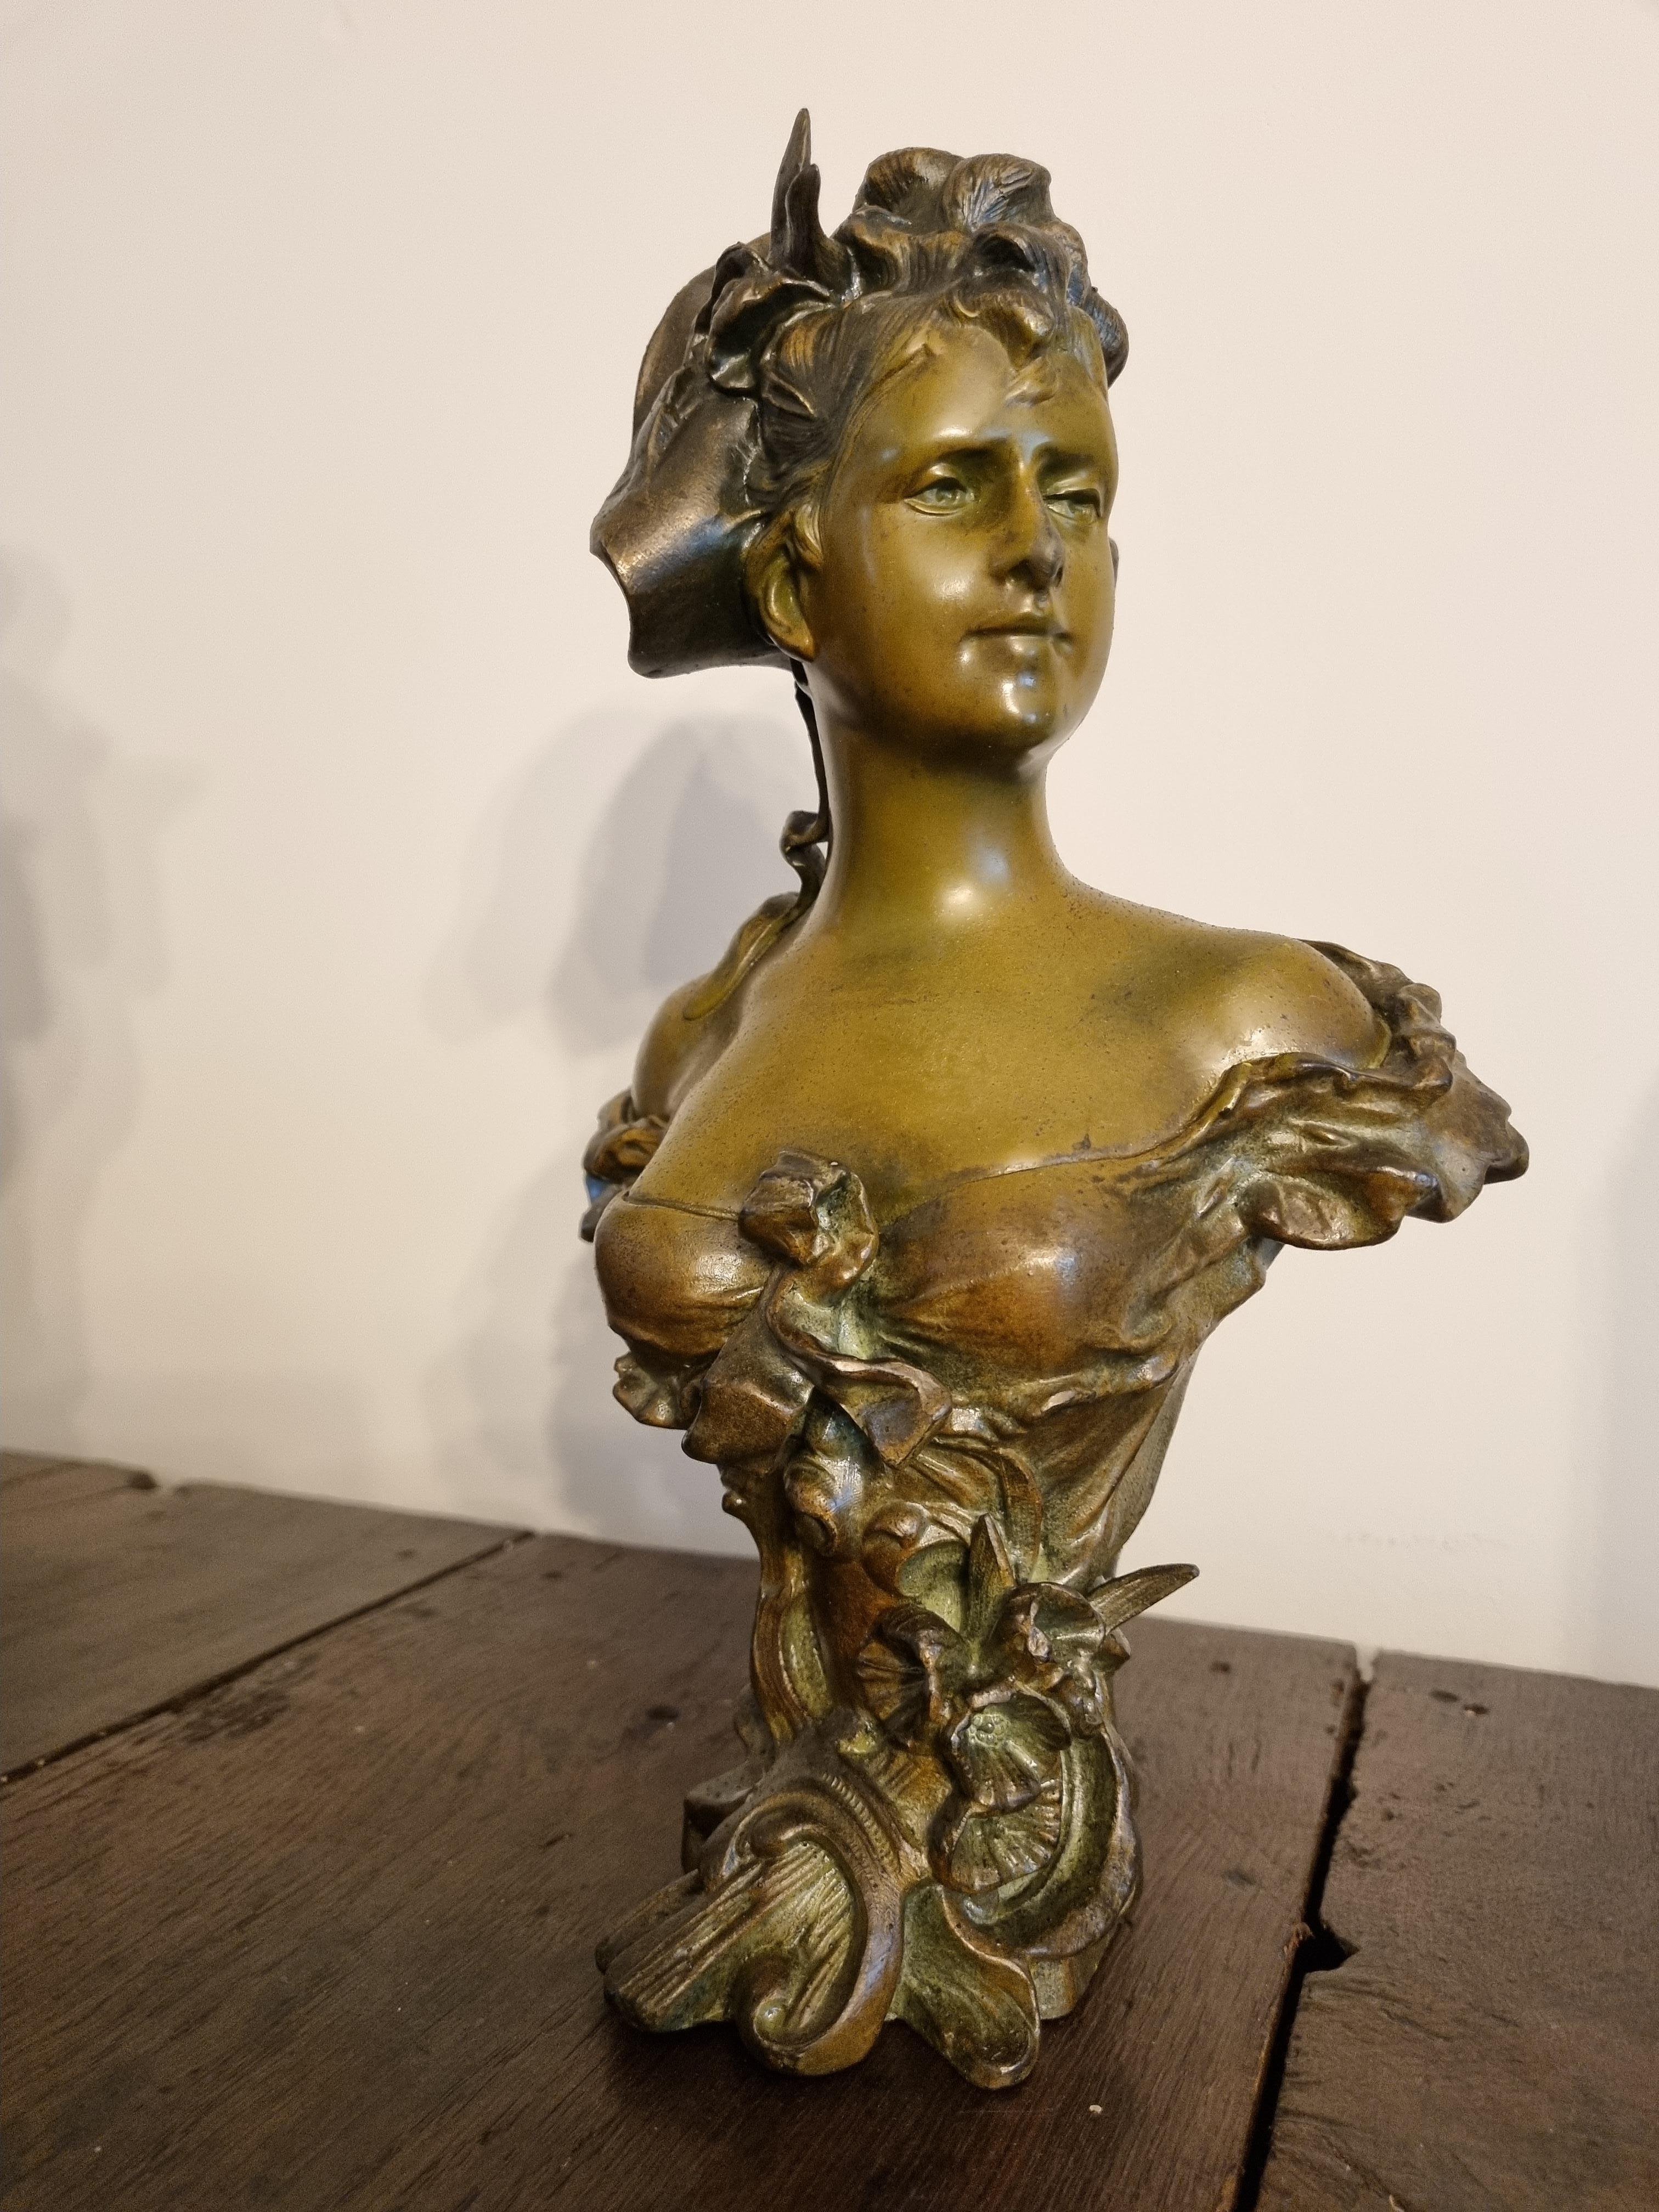 Art Nouveau bronze bust , circa 1900 

Alfred Jean Foretay, 1861-1944, 

A renowned artist of the late 19th and early 20th century . 

A beautifully detailed cold-painted white bronze bust of an Art Nouveau lady.

This sculpture showcases Foretay's